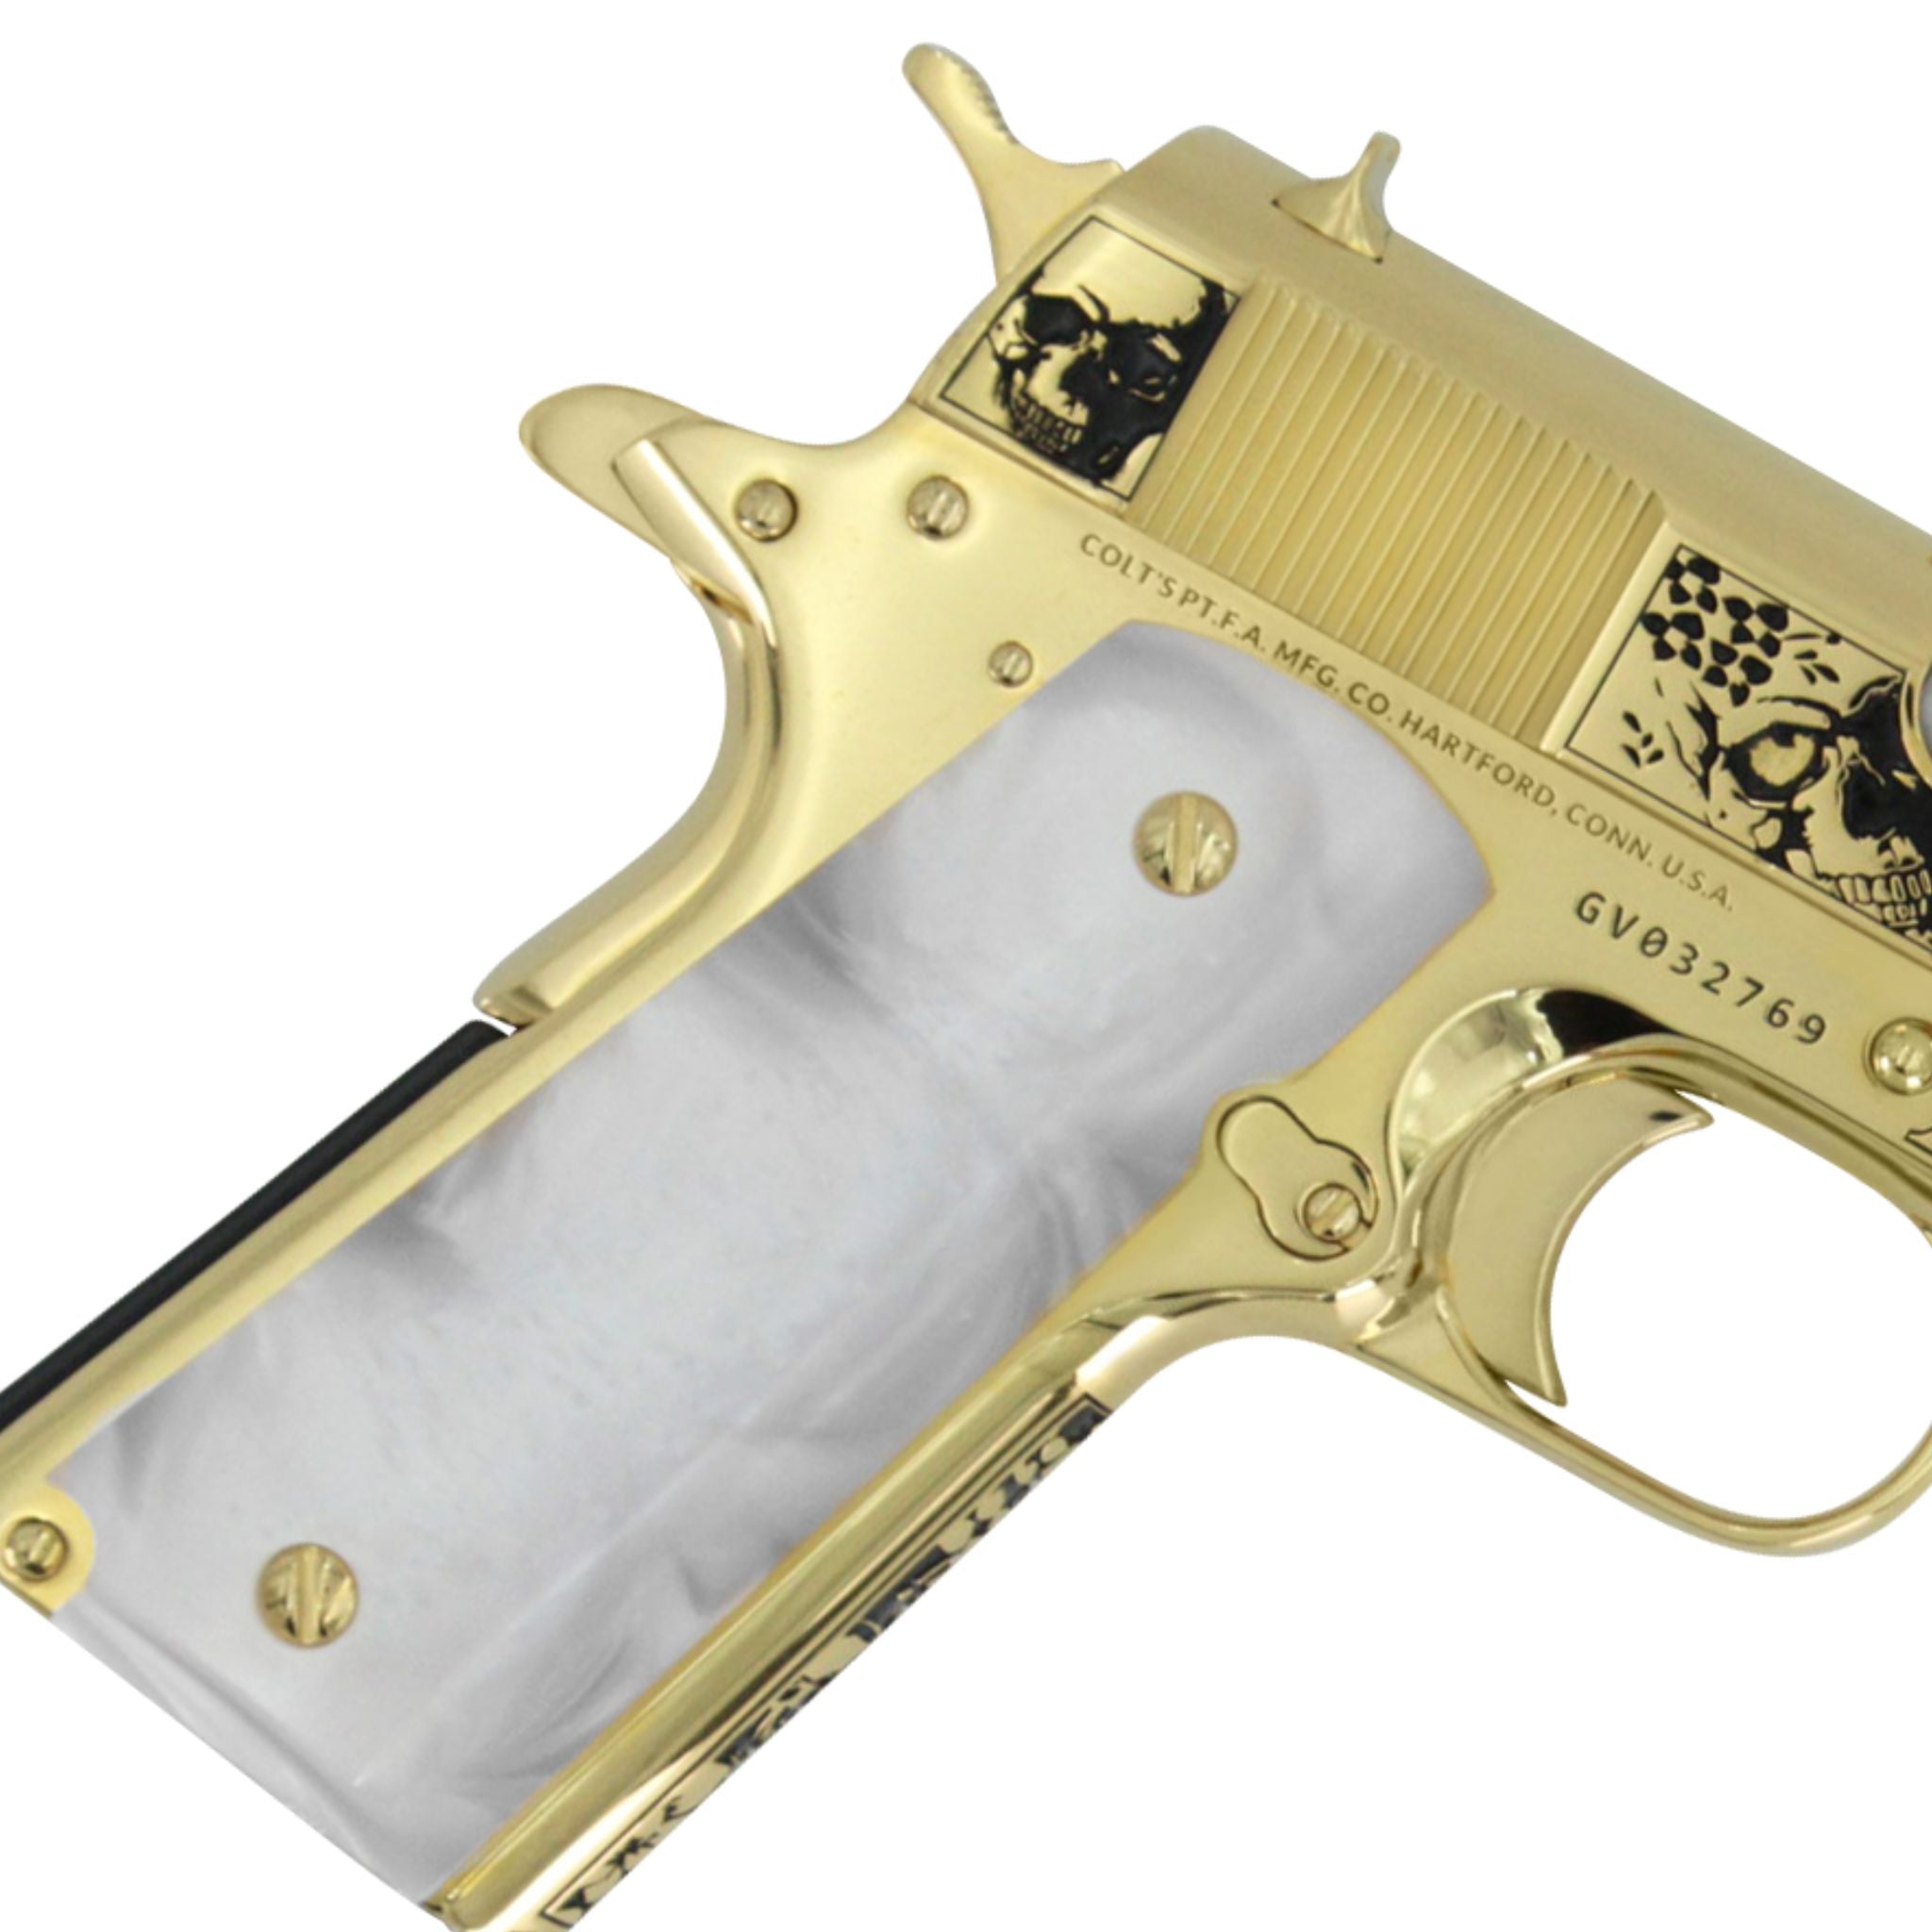 Colt 1911 Government, 45ACP, Memento Vivere, 24K All Gold Plated, Pearlized Polymer Grips, 24 karat Gold Guns,4355355869286,  098289112187